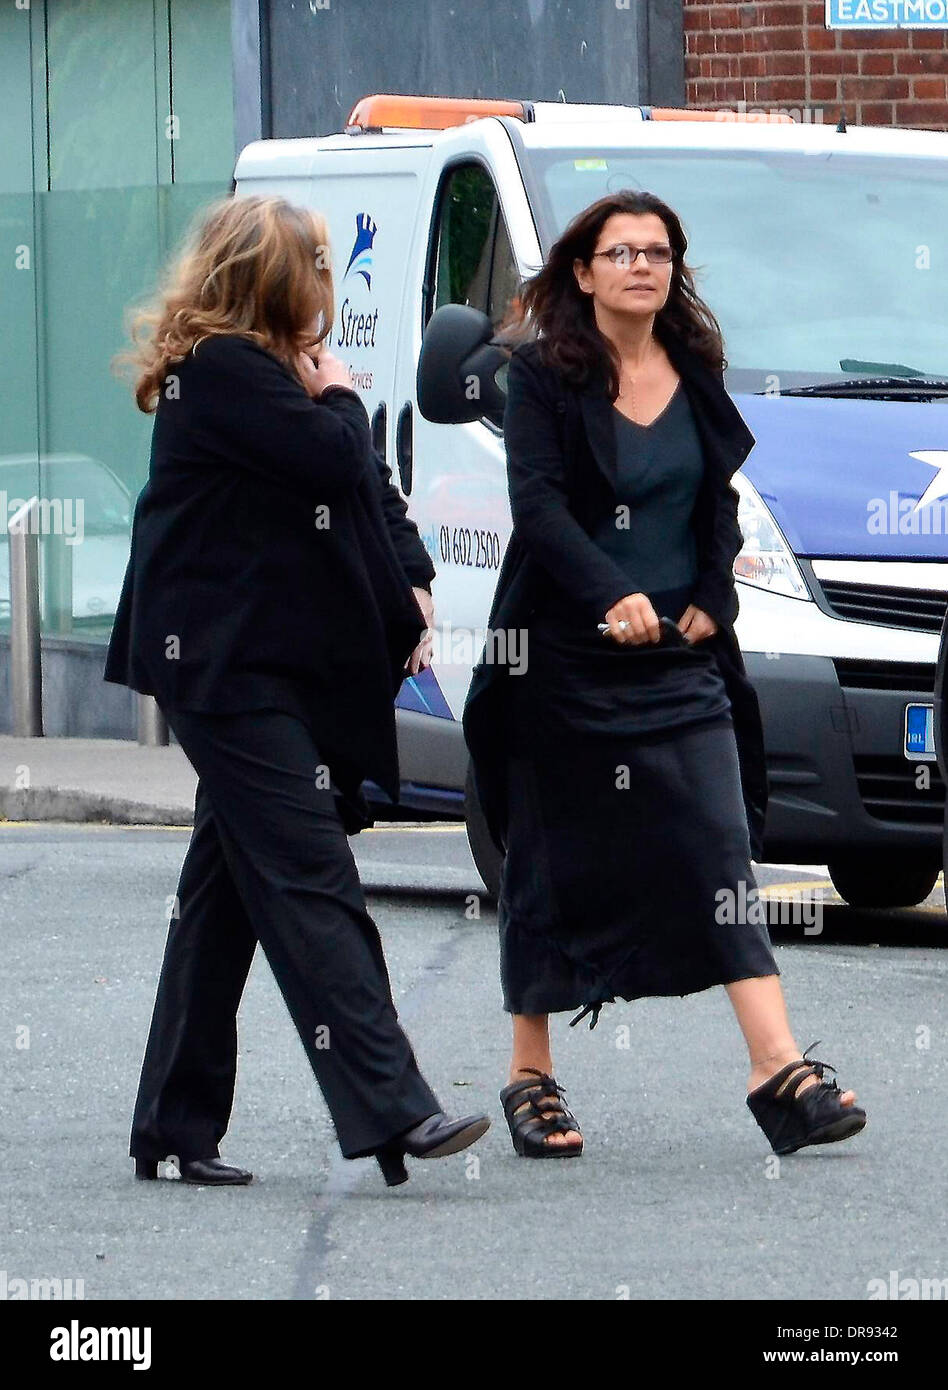 Ali Hewson U2 guitarist, The Edge meets Bono at the Dylan hotel amid reports that his mother Gwenda Evans has died Dublin, Ireland - 13.06.12 Stock Photo